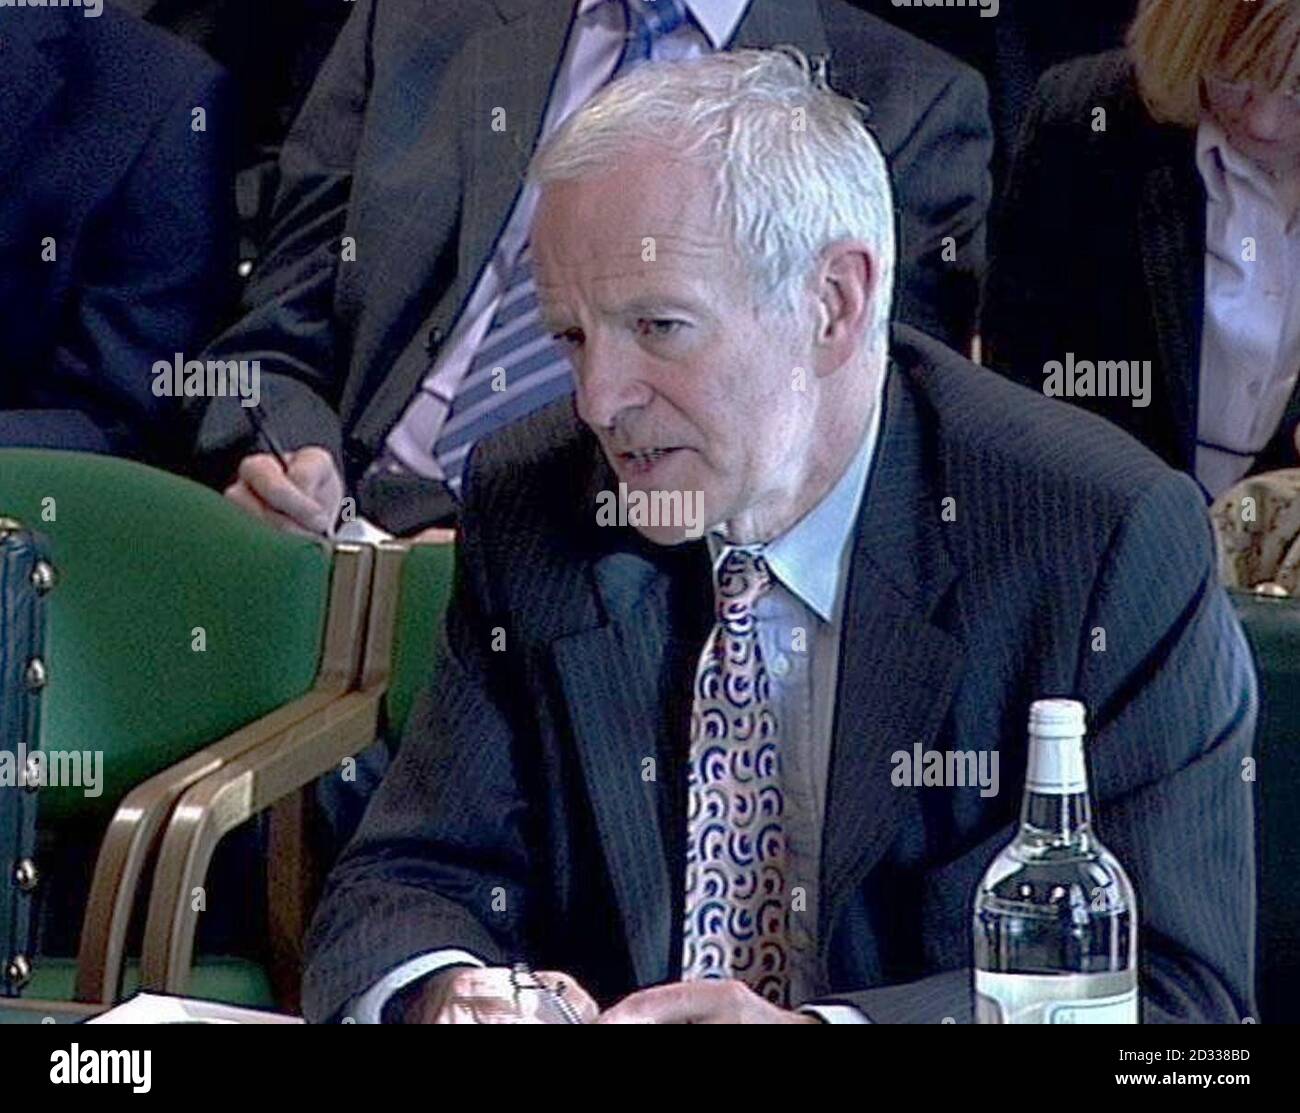 Callum McCarthy, Chairman of the Financial Service Authority, giving evidence, at the House of Commons to the Treasury Select Committee.  Stock Photo